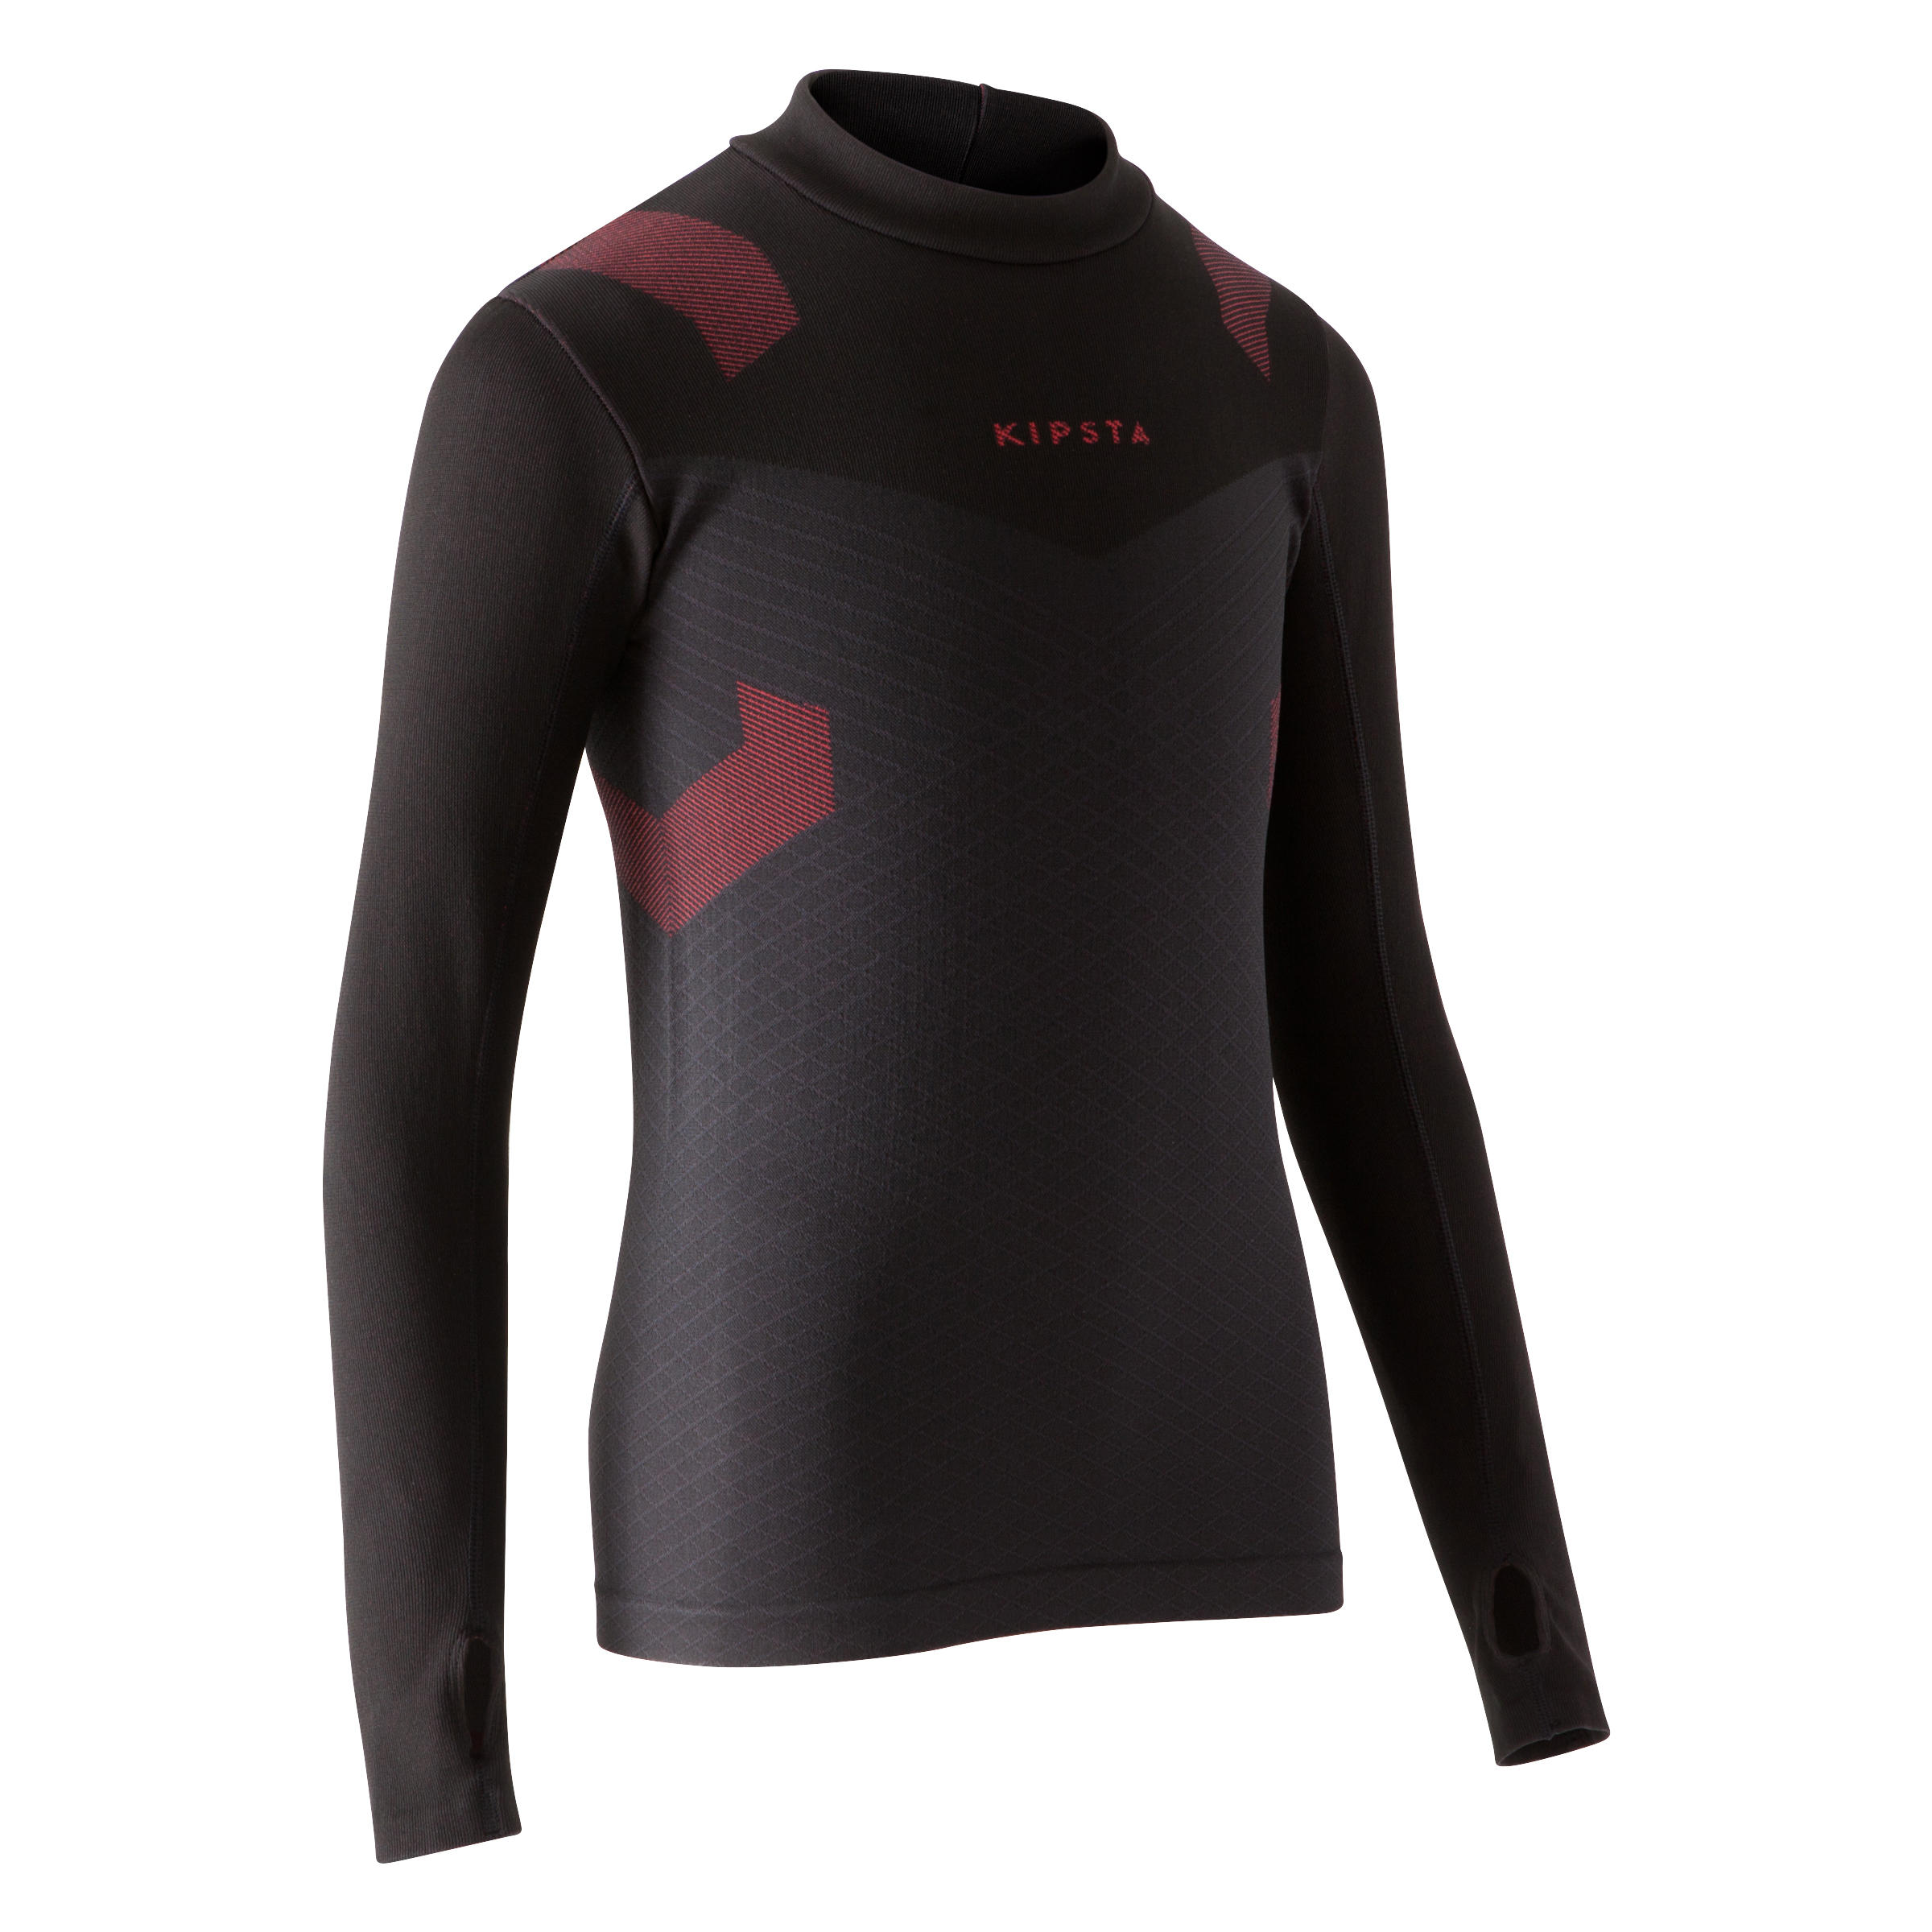 Keepdry 900 Kids' Warm Breathable Long-Sleeved Base Layer - Black/Red 1/11